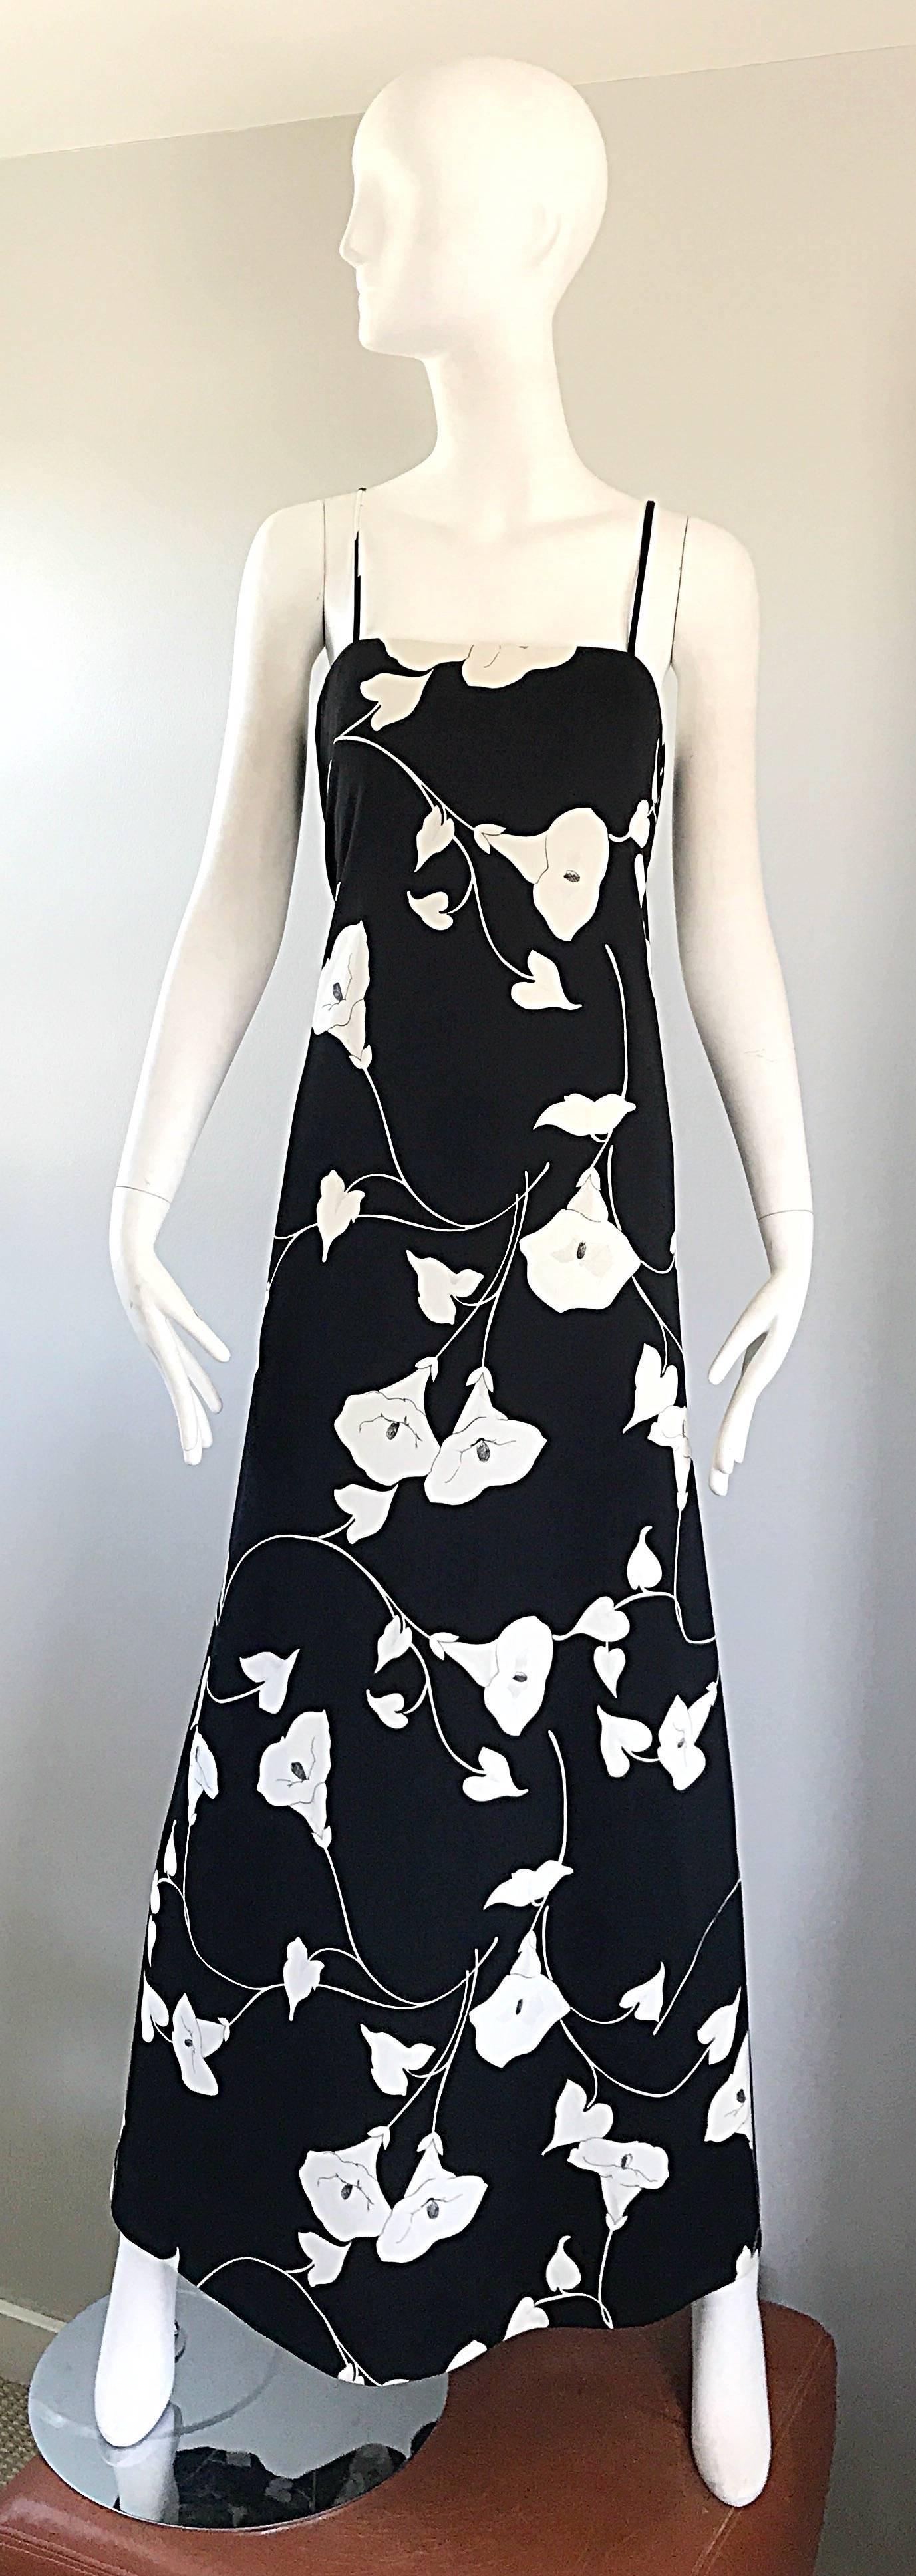 Gorgeous 1970s LUIS ESTEVEZ black and white tulip print jersey maxi dress! Comfortable stretch jersey with a fitted bodice and forgiving full skirt. Spaghetti straps, with hidden metal zipper up the back with hook-and-eye closure. The perfect